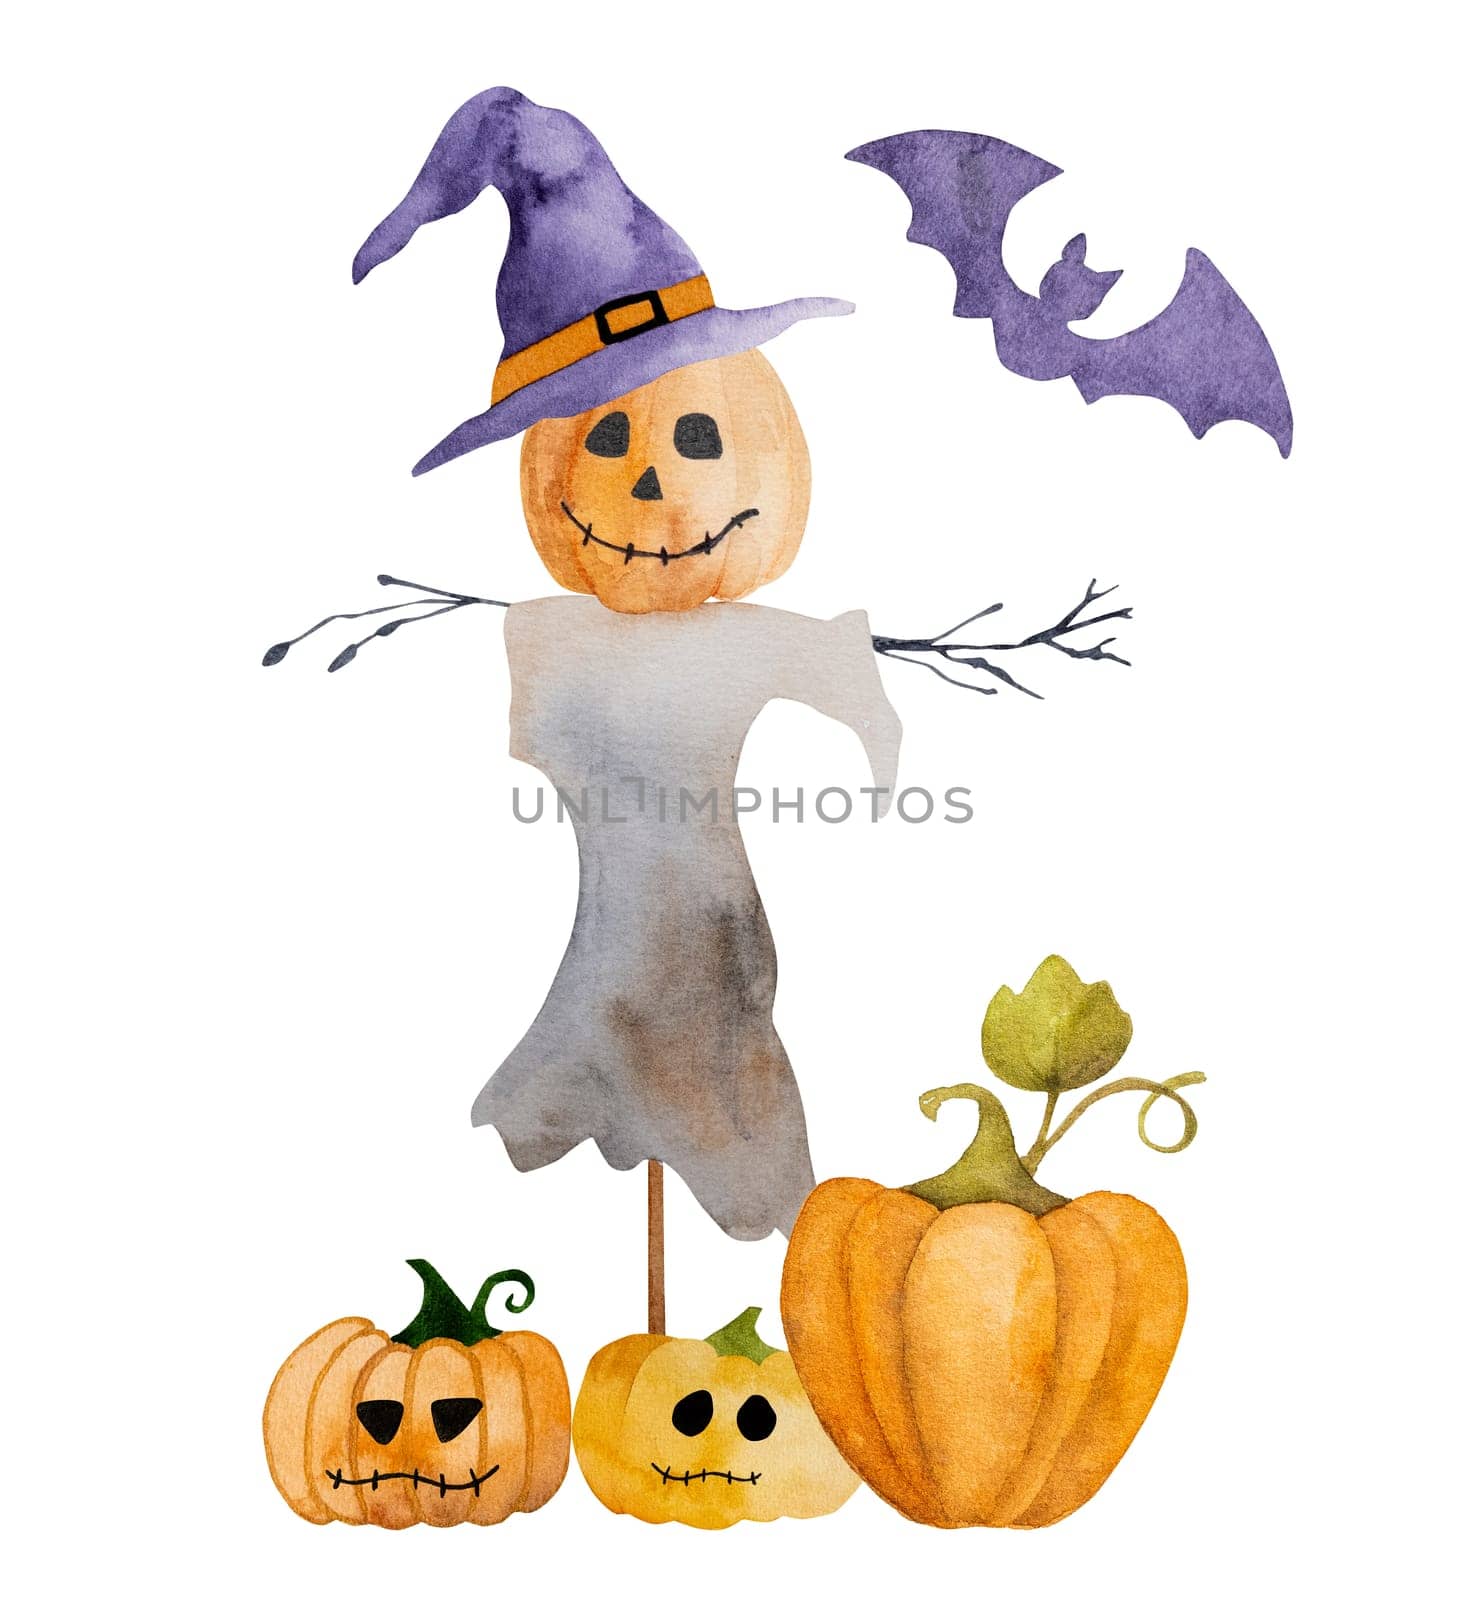 Halloween spooky scarecrow with pumpkin head and bats watercolor painting for postcard design. Creepy autumn holiday illustration